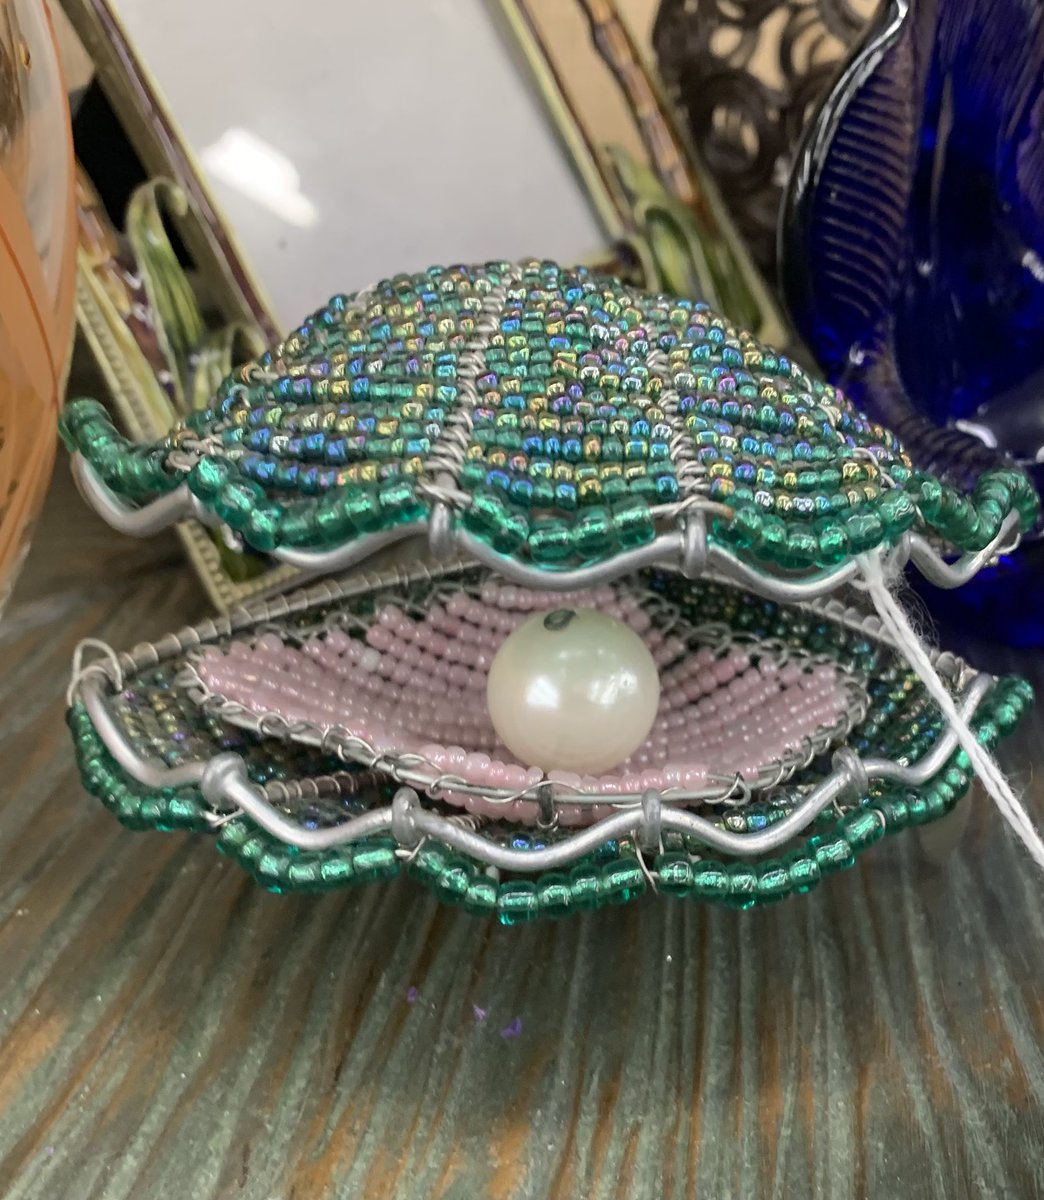 ✨Top of morning Gem Hunters! Look at this beaded gem! 💎 🏴‍☠️ 🐚

#Thriftinginspiration #Thrifting #Gem #Thriftfind #Thriftgem #Thrifthunting #thrifted #thrift #Thriftstorehaul #thrifty #secondhand #Gemz #iSpy #TREASURE #HappyThrifting #decor #nauticaldecor #collectibles #Goodwill